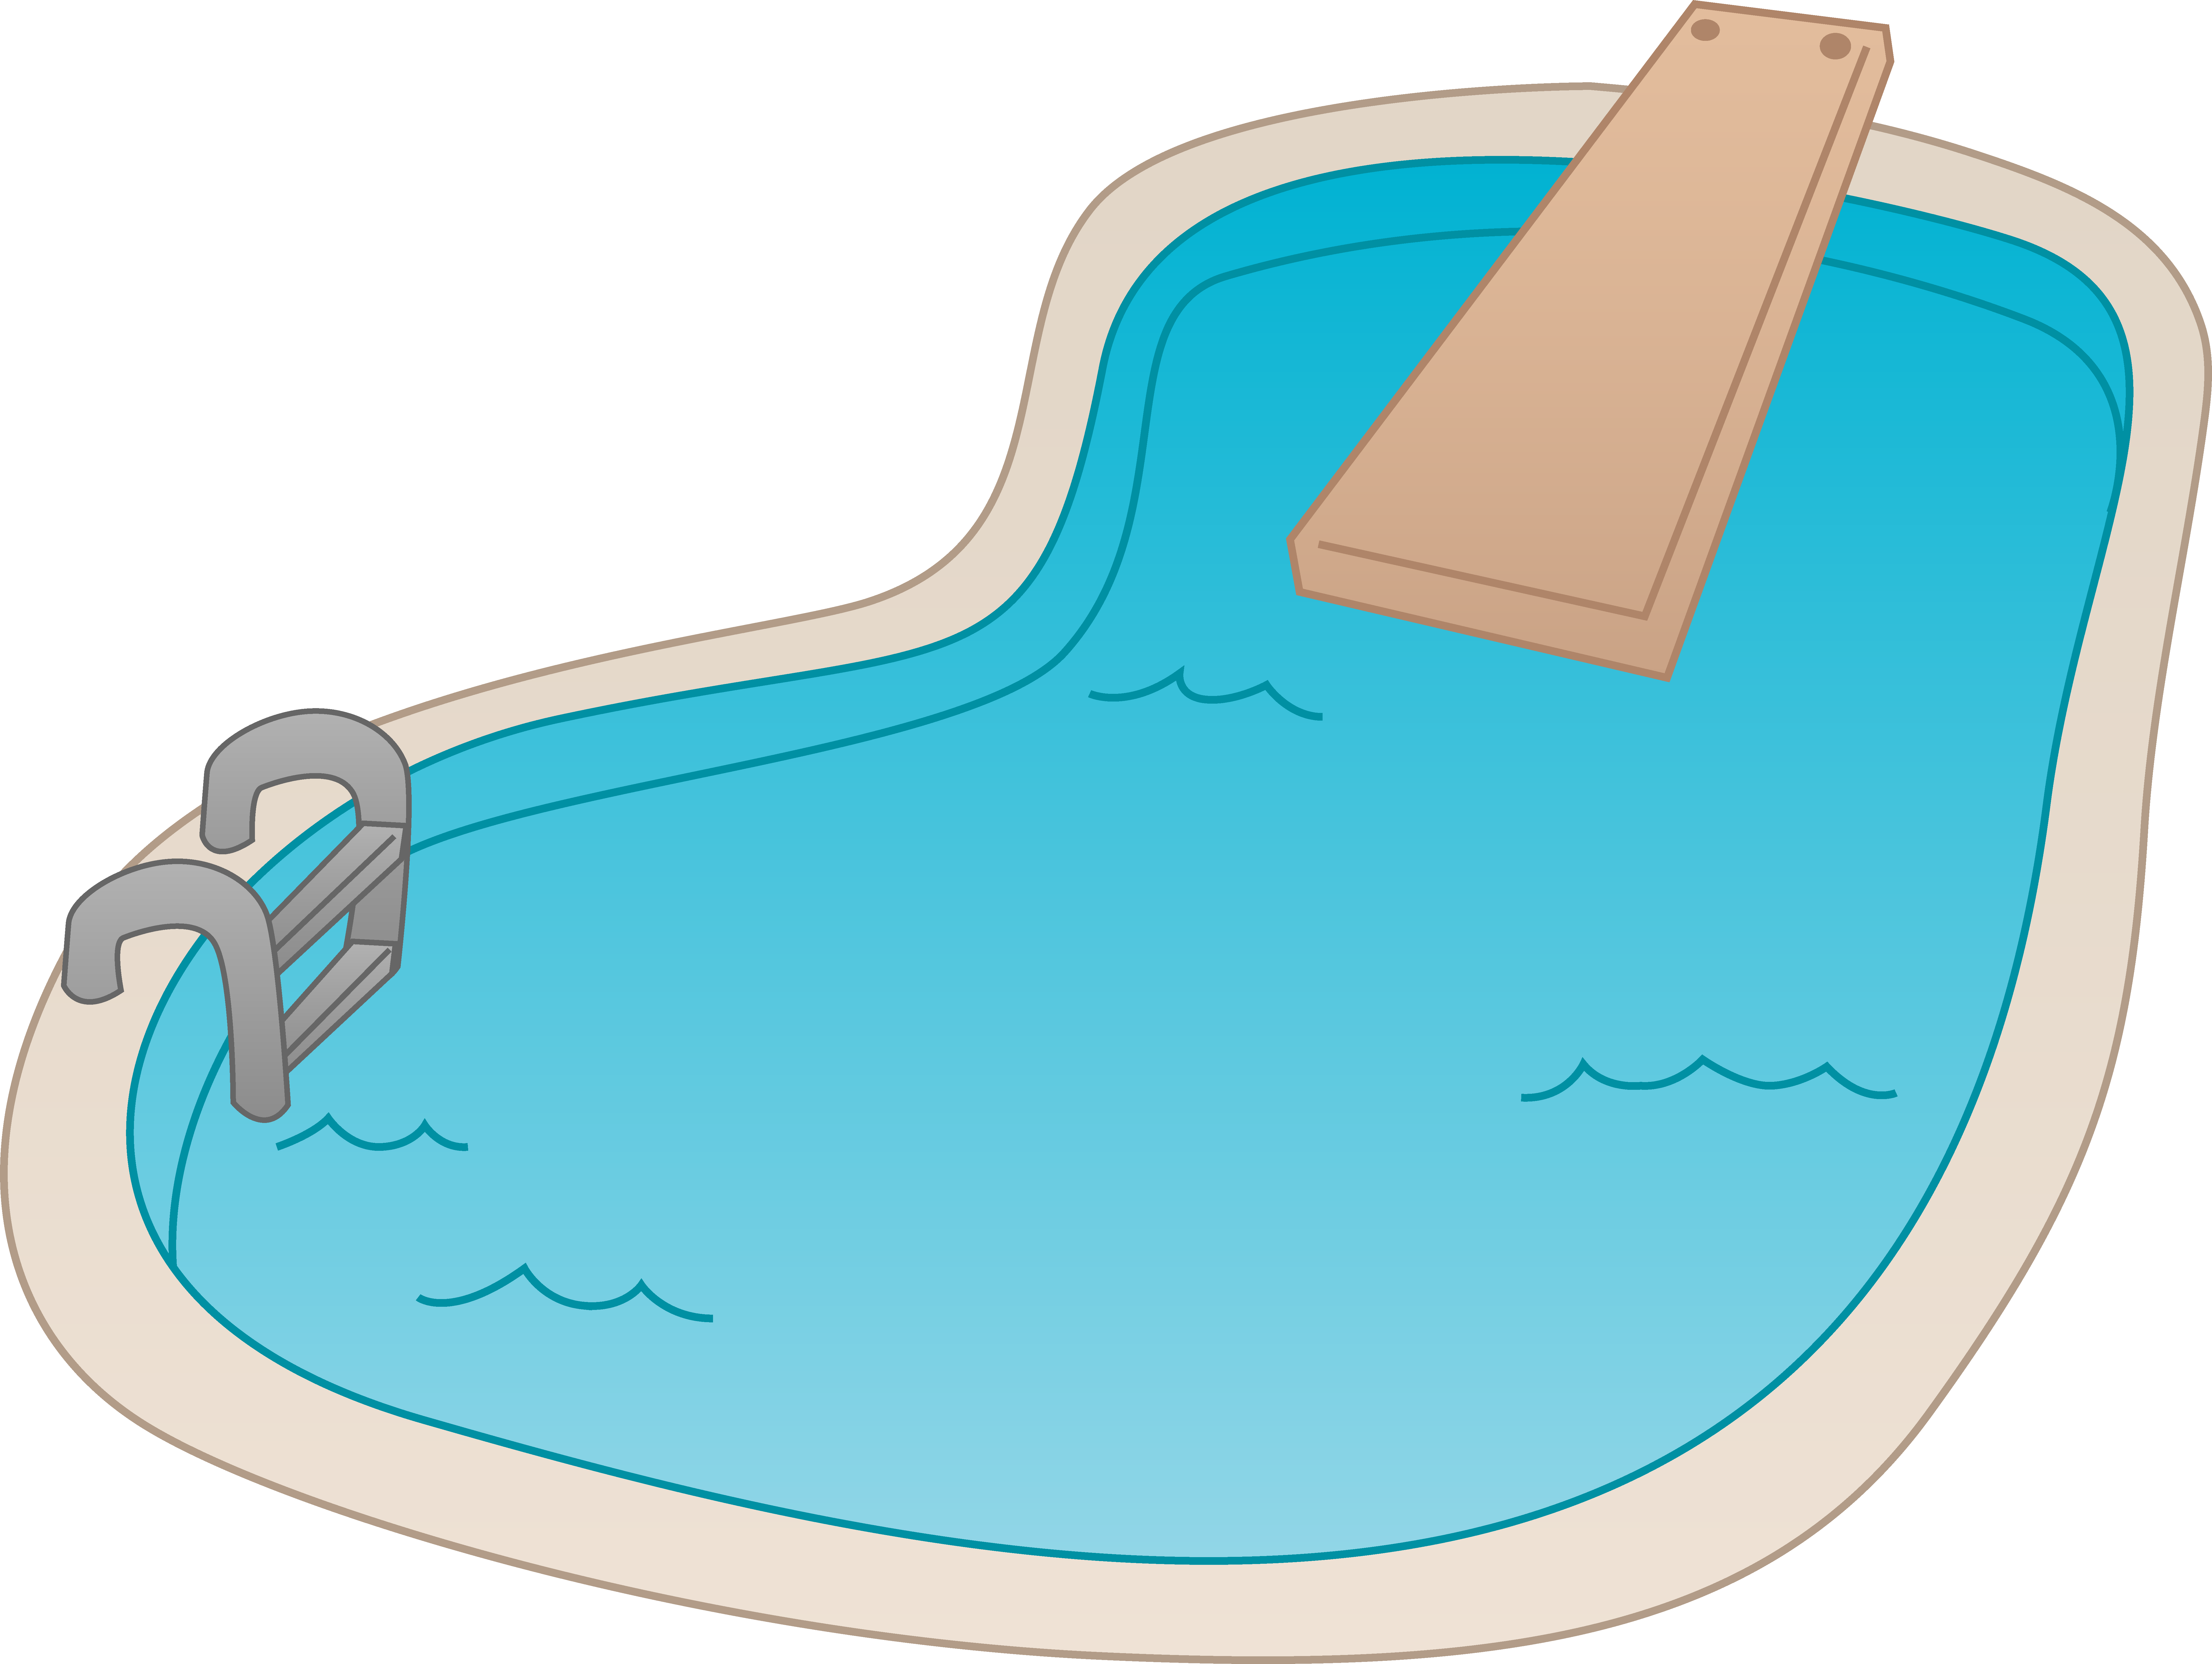 Swimming Pool Cartoon Images - Cliparts.co